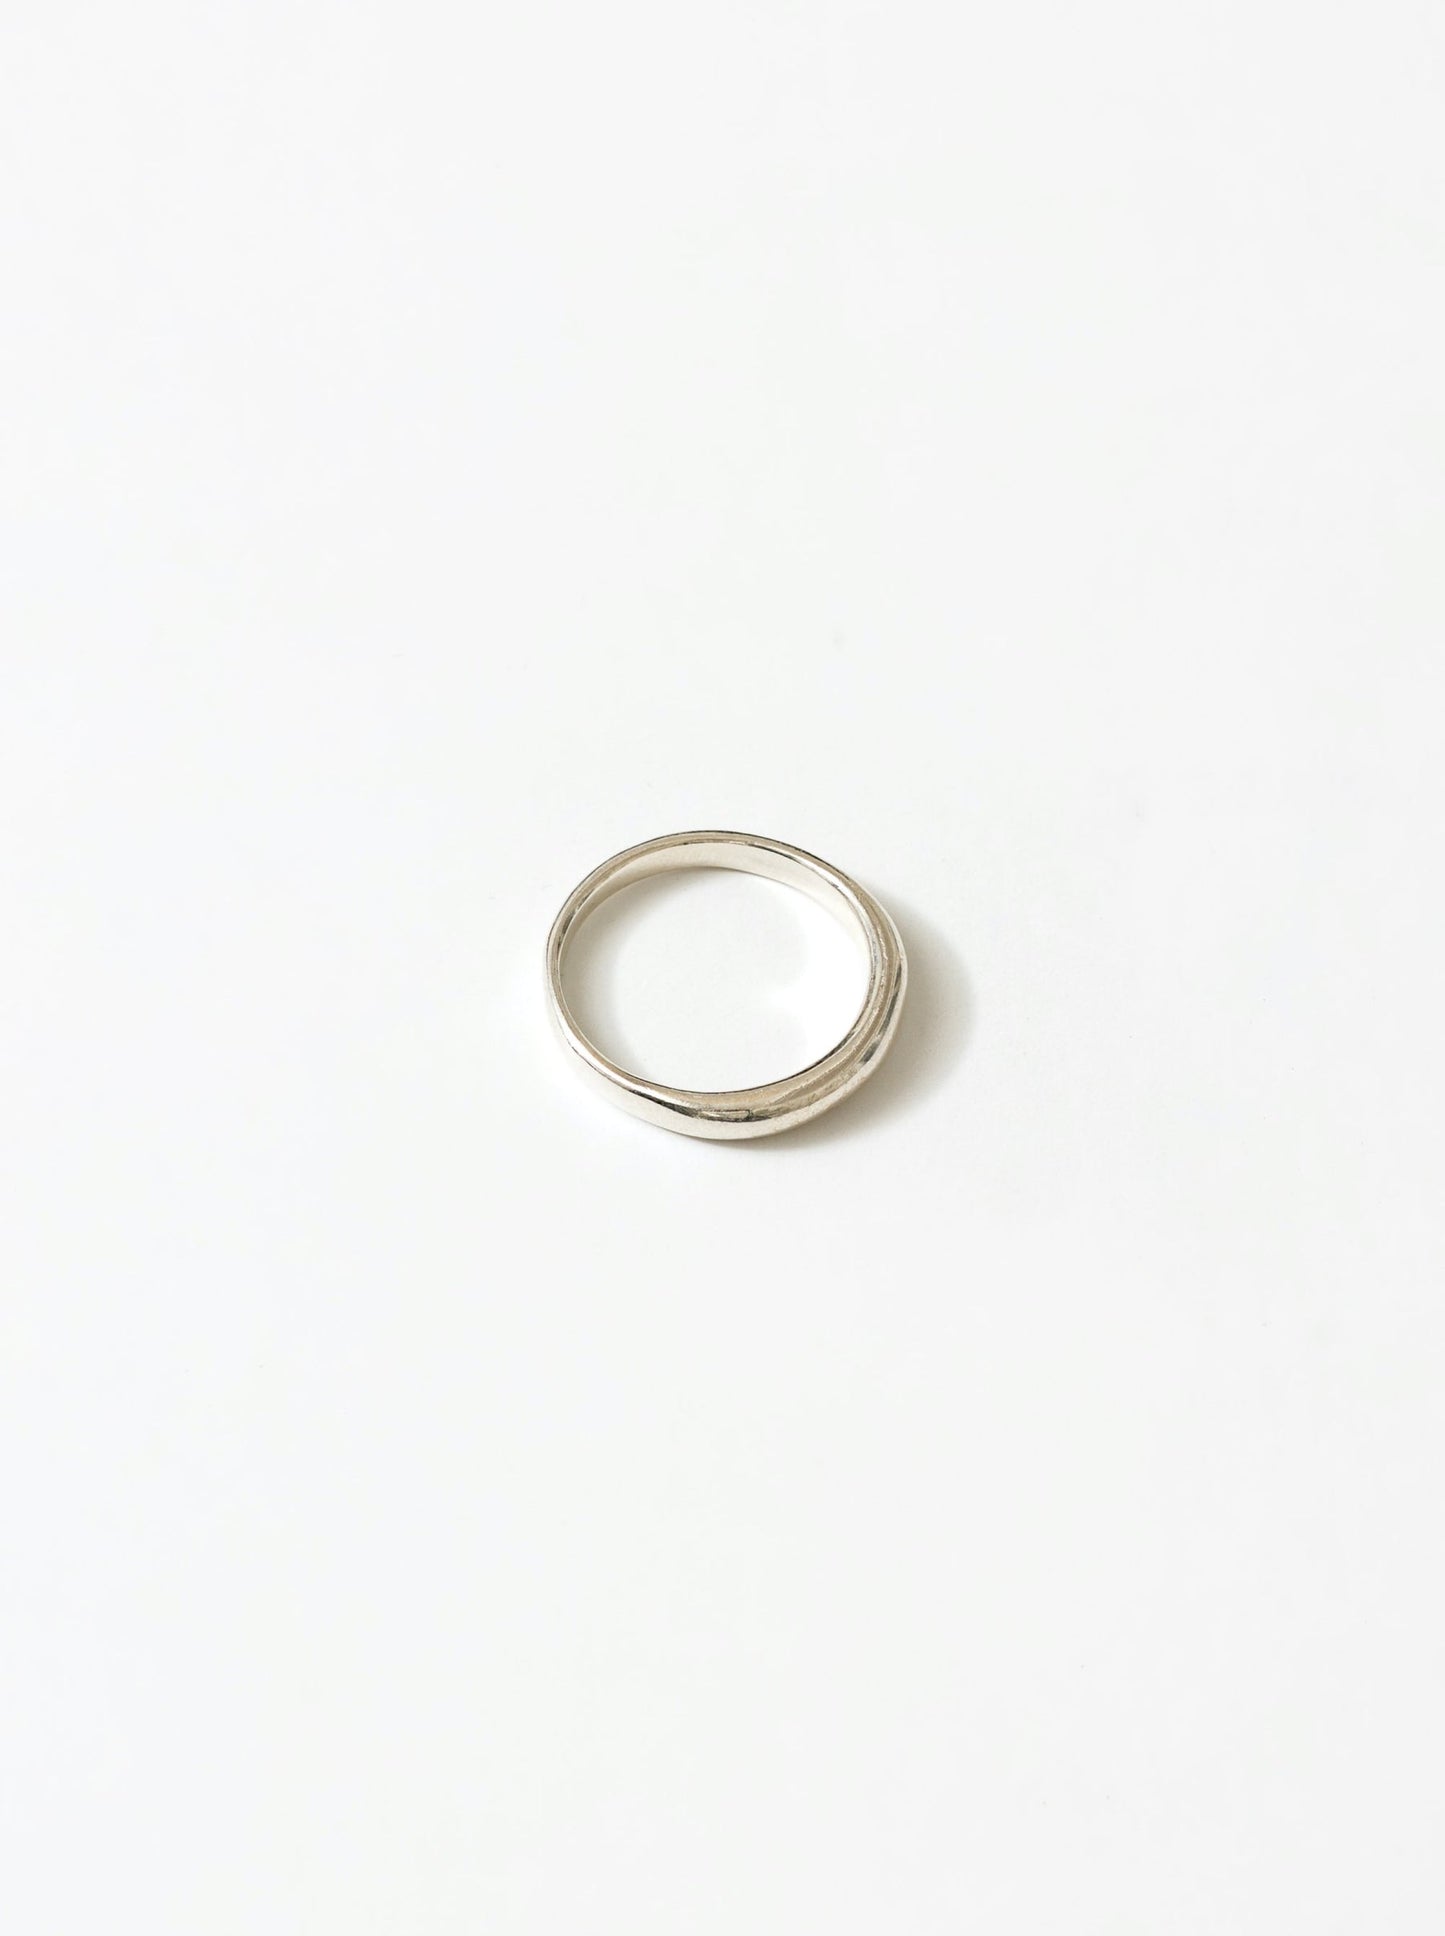 Emeile Ring | Sterling Silver